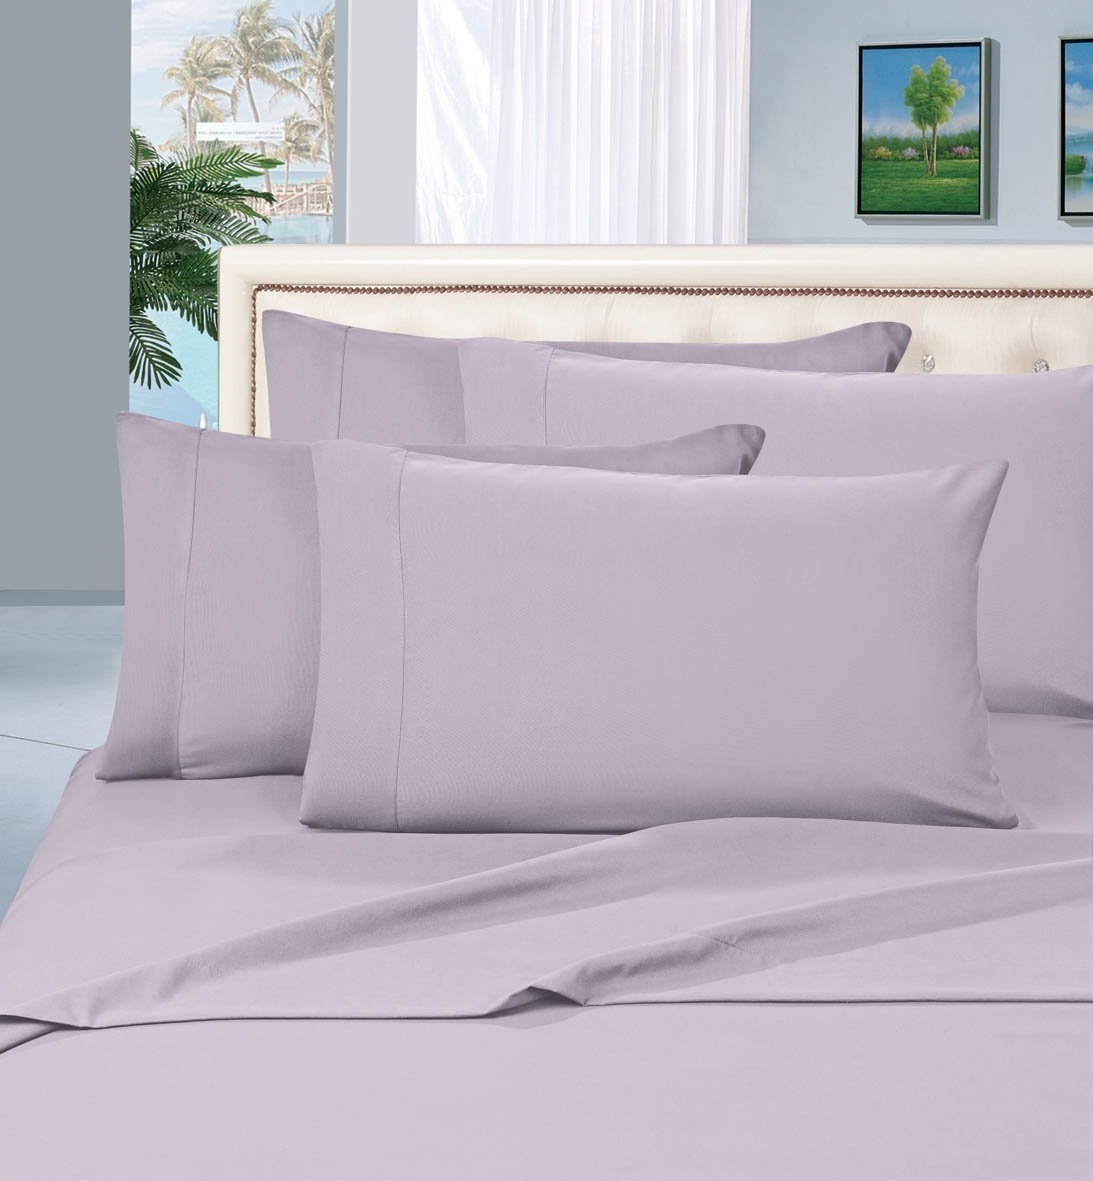 Elegant Comfort 1500 Series Wrinkle Resistant Egyptian Quality Hypoallergenic Ultra Soft Luxury 4-piece Bed Sheet Set, Queen, Lilac